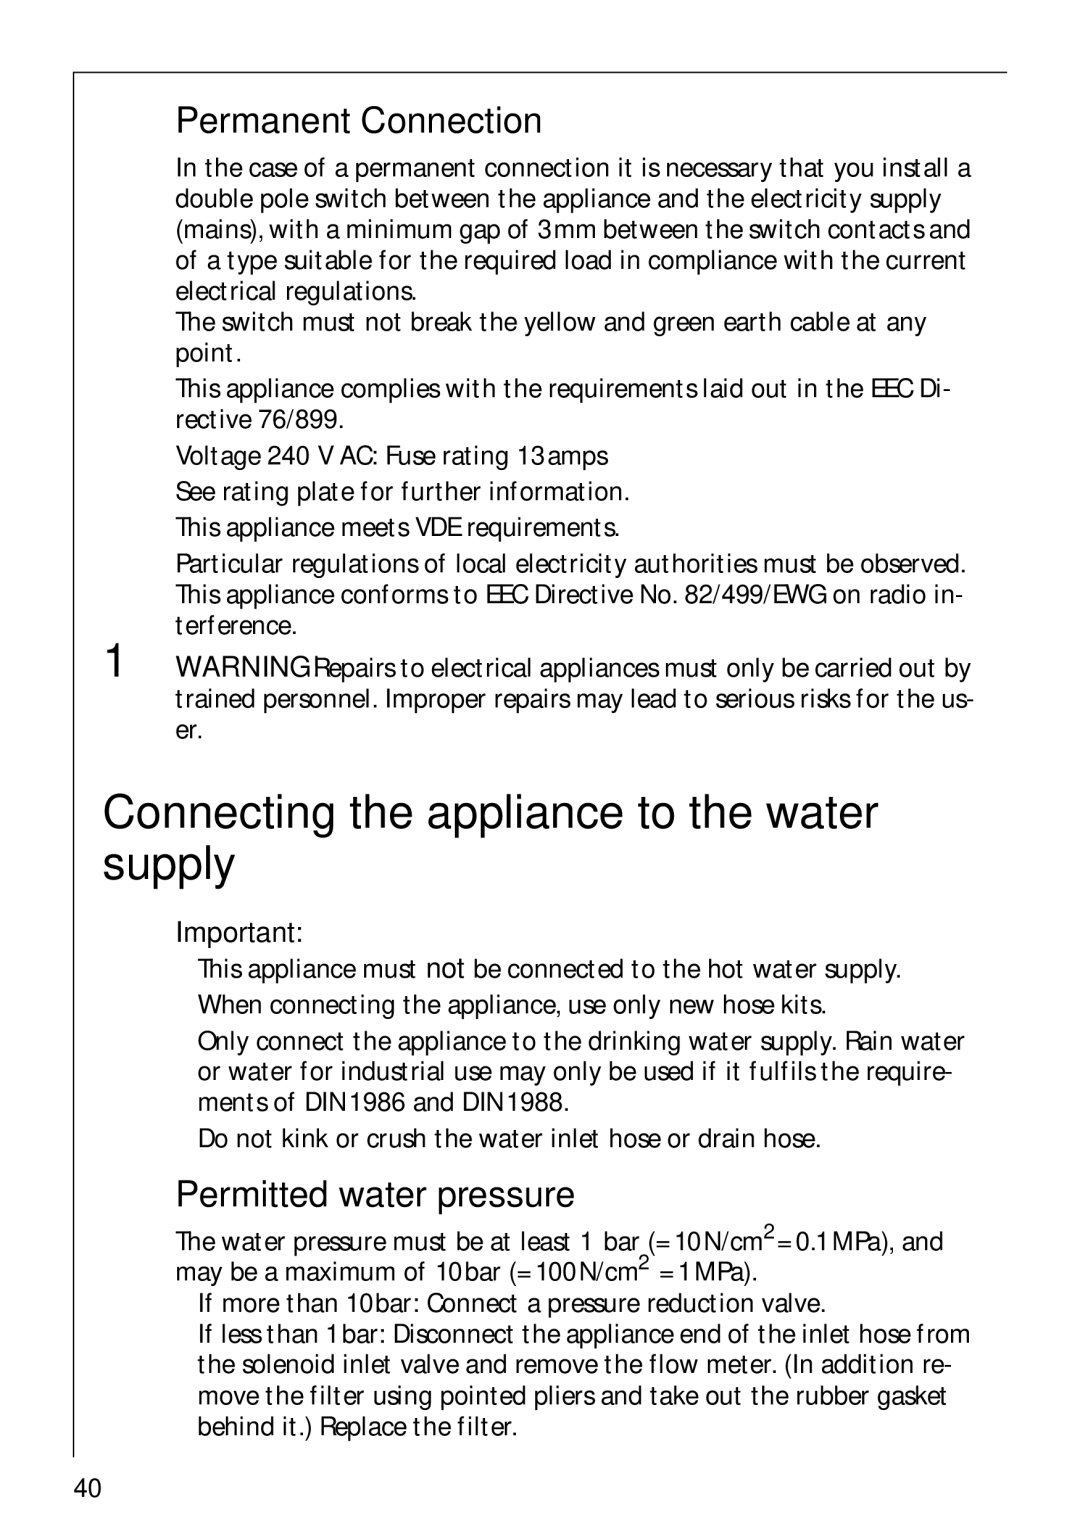 Electrolux 88810 manual Connecting the appliance to the water supply, Permanent Connection, Permitted water pressure 